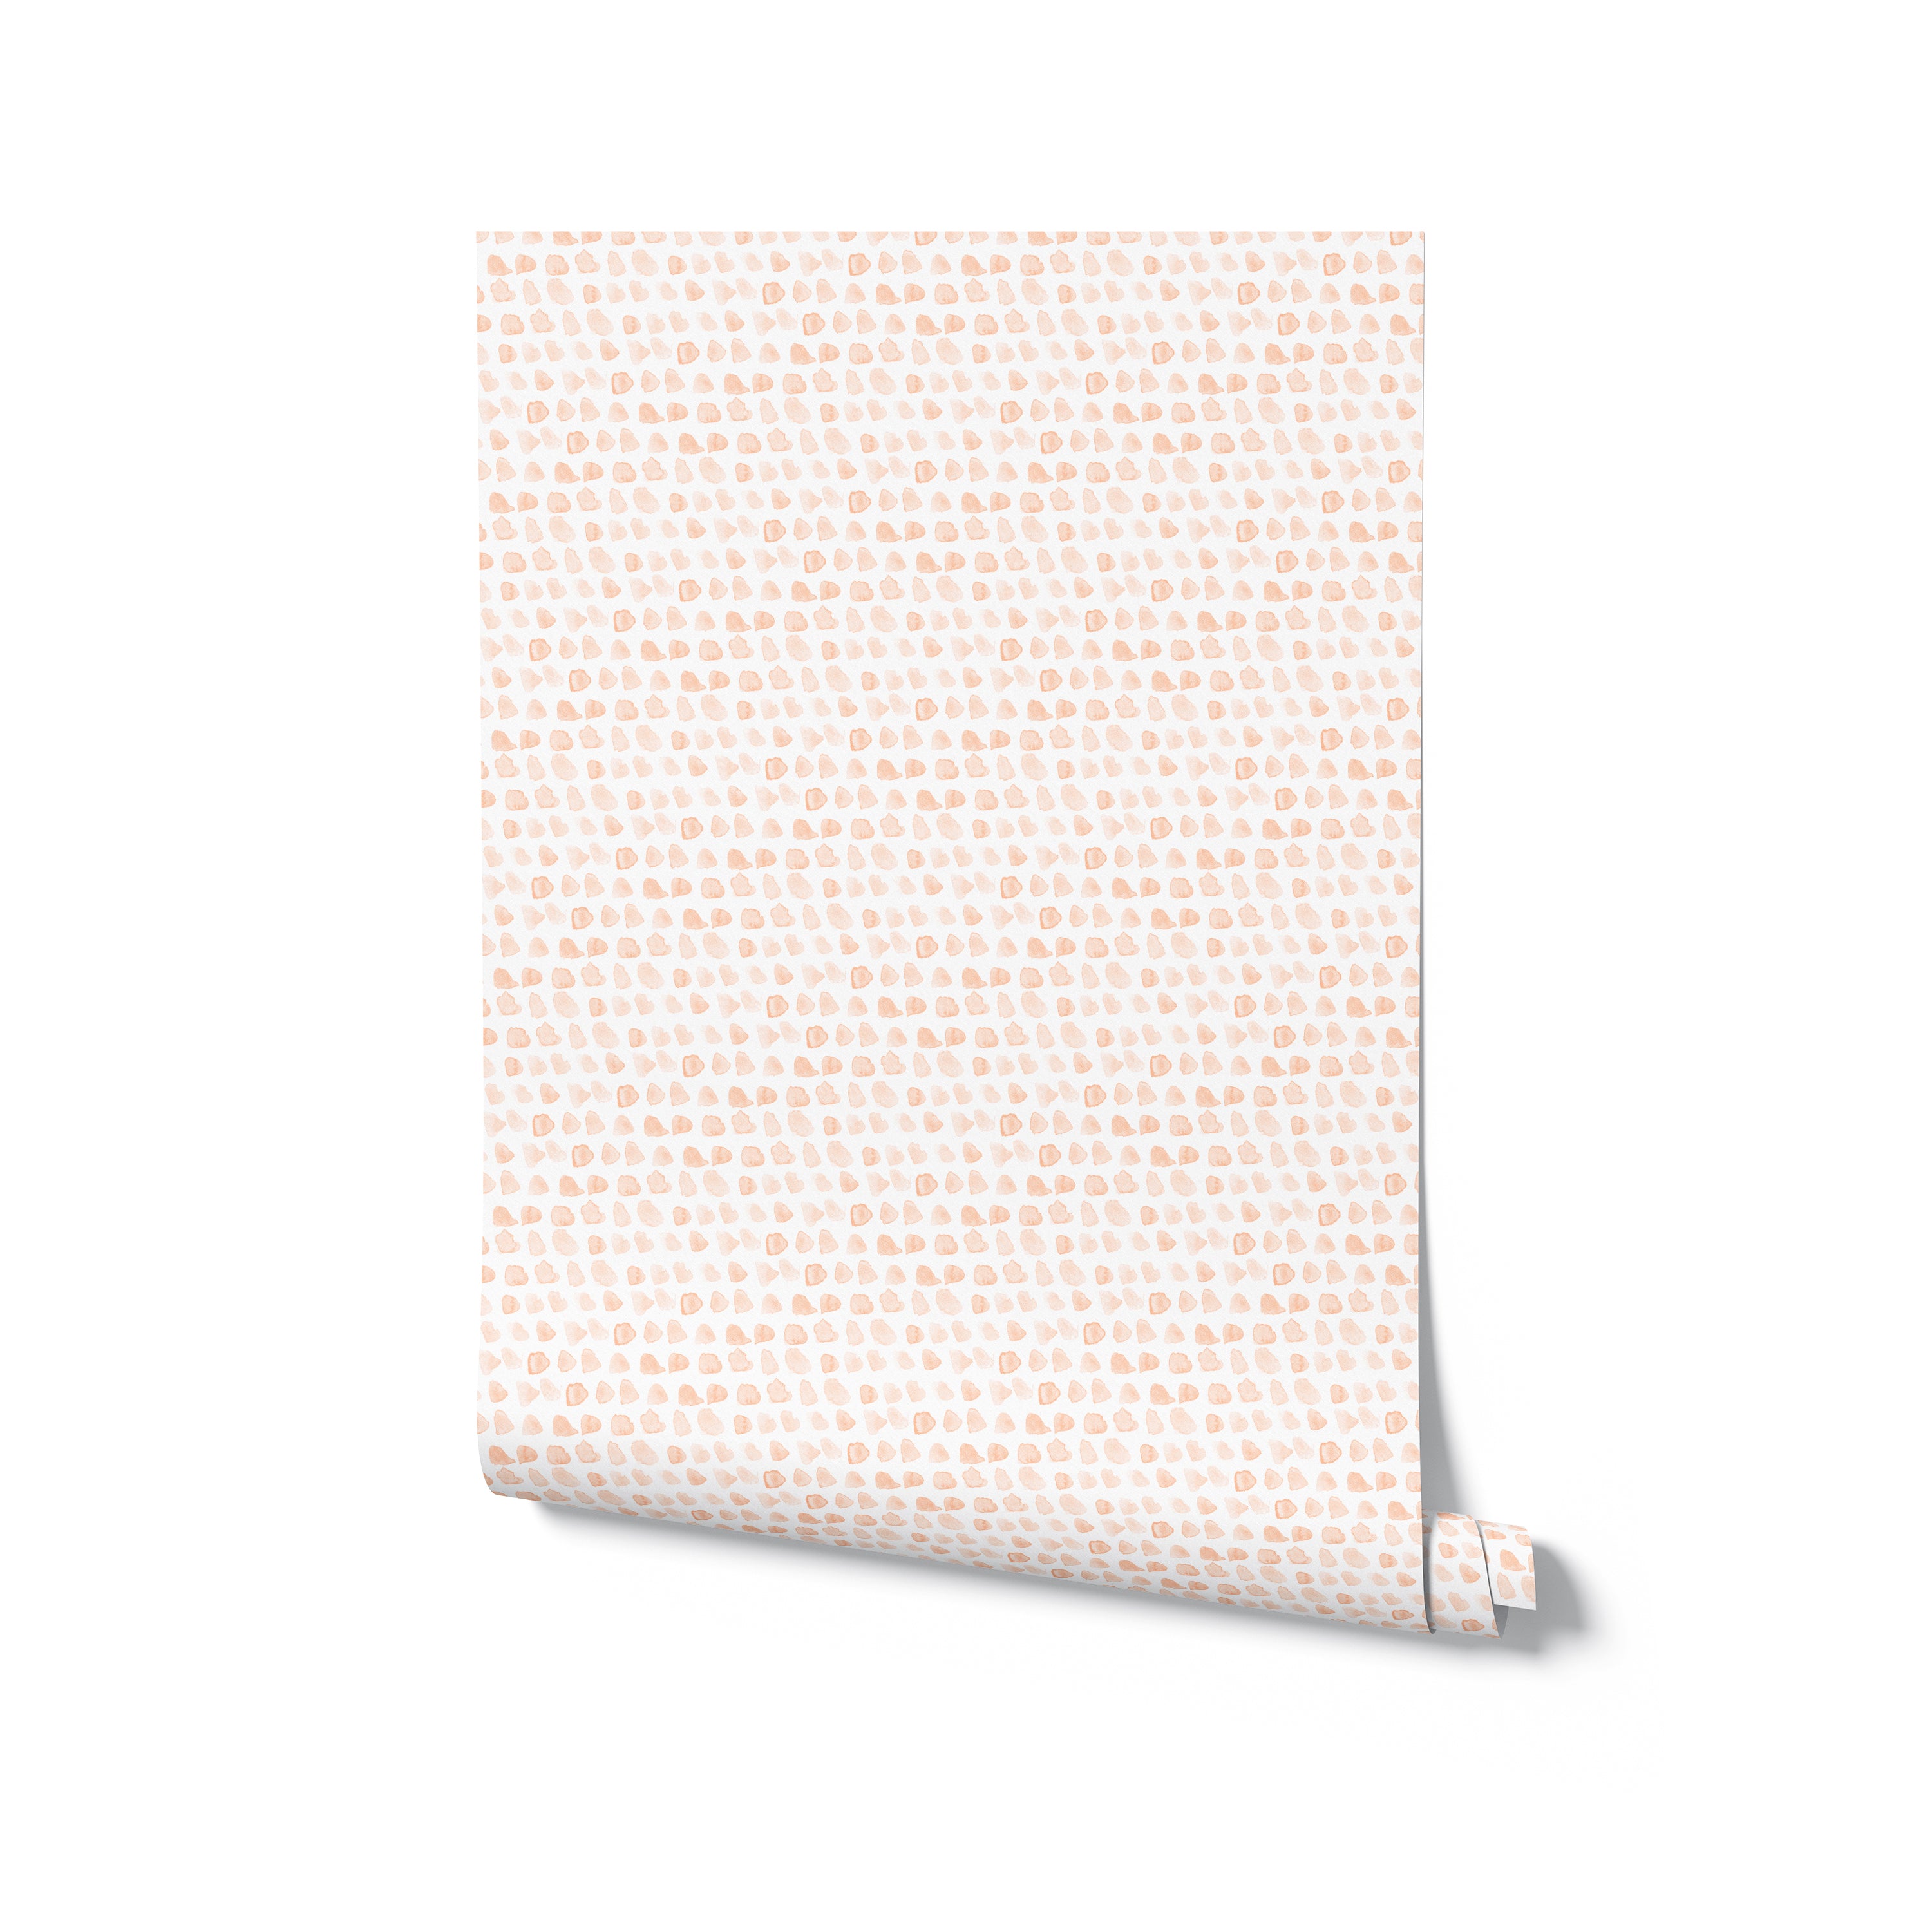 A roll of Hand Painted Dots Wallpaper in Peach Fuzz, partially unrolled to display the whimsical dot pattern in peach on a light background, perfect for adding a touch of light-hearted fun to rooms needing a gentle splash of color